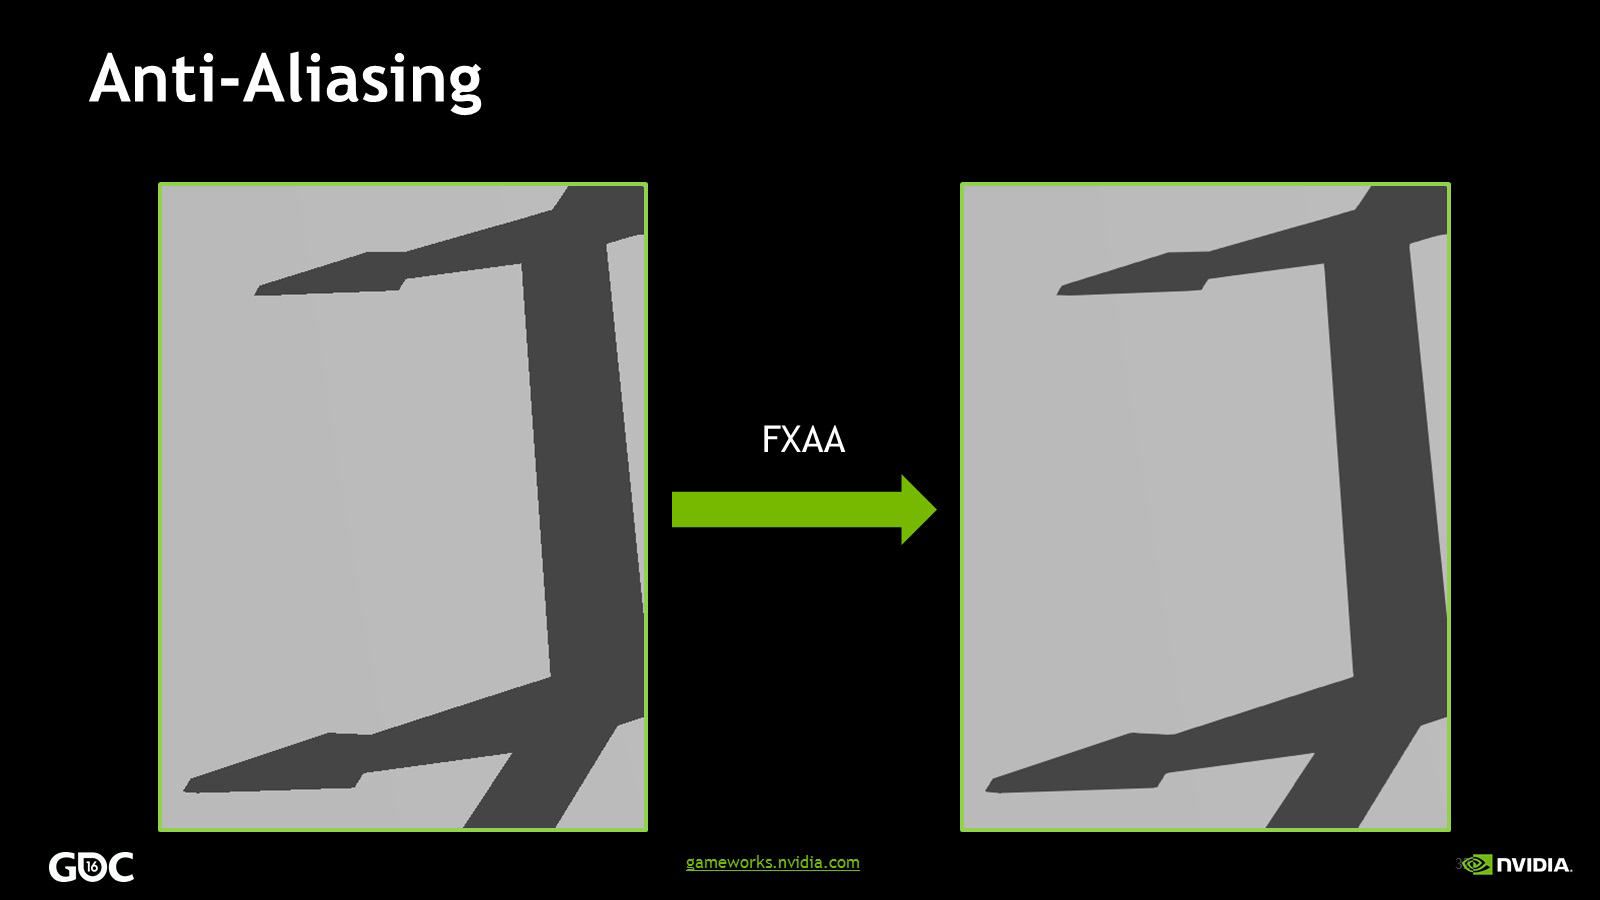 Post-Process Anti-Aliasing is applied to remove aliasing from the edges of shadows